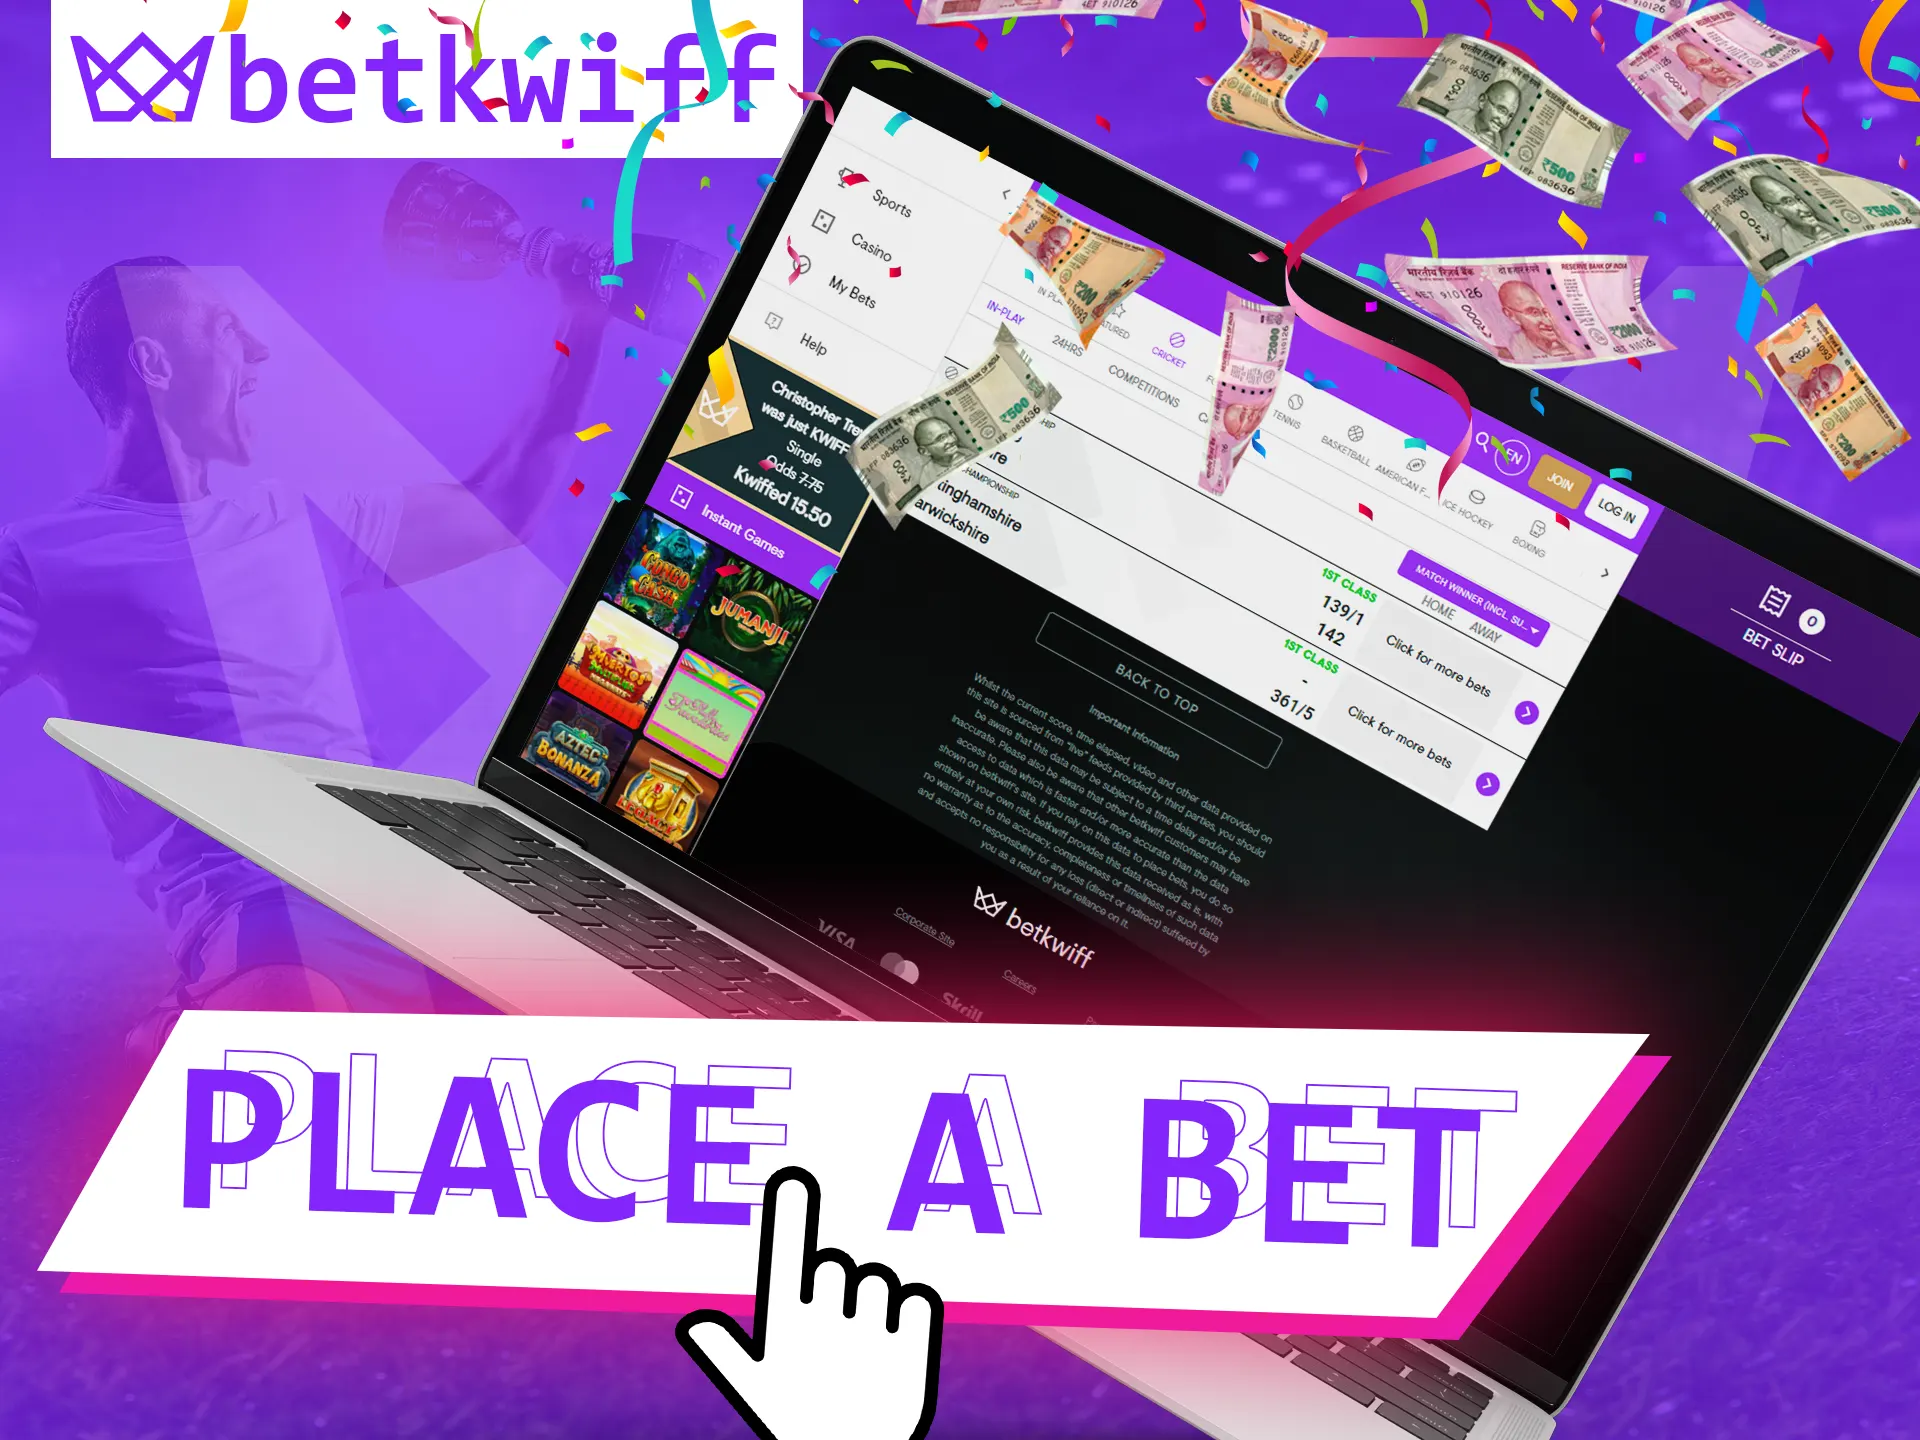 Learn how easy it is to bet on Betkwiff.